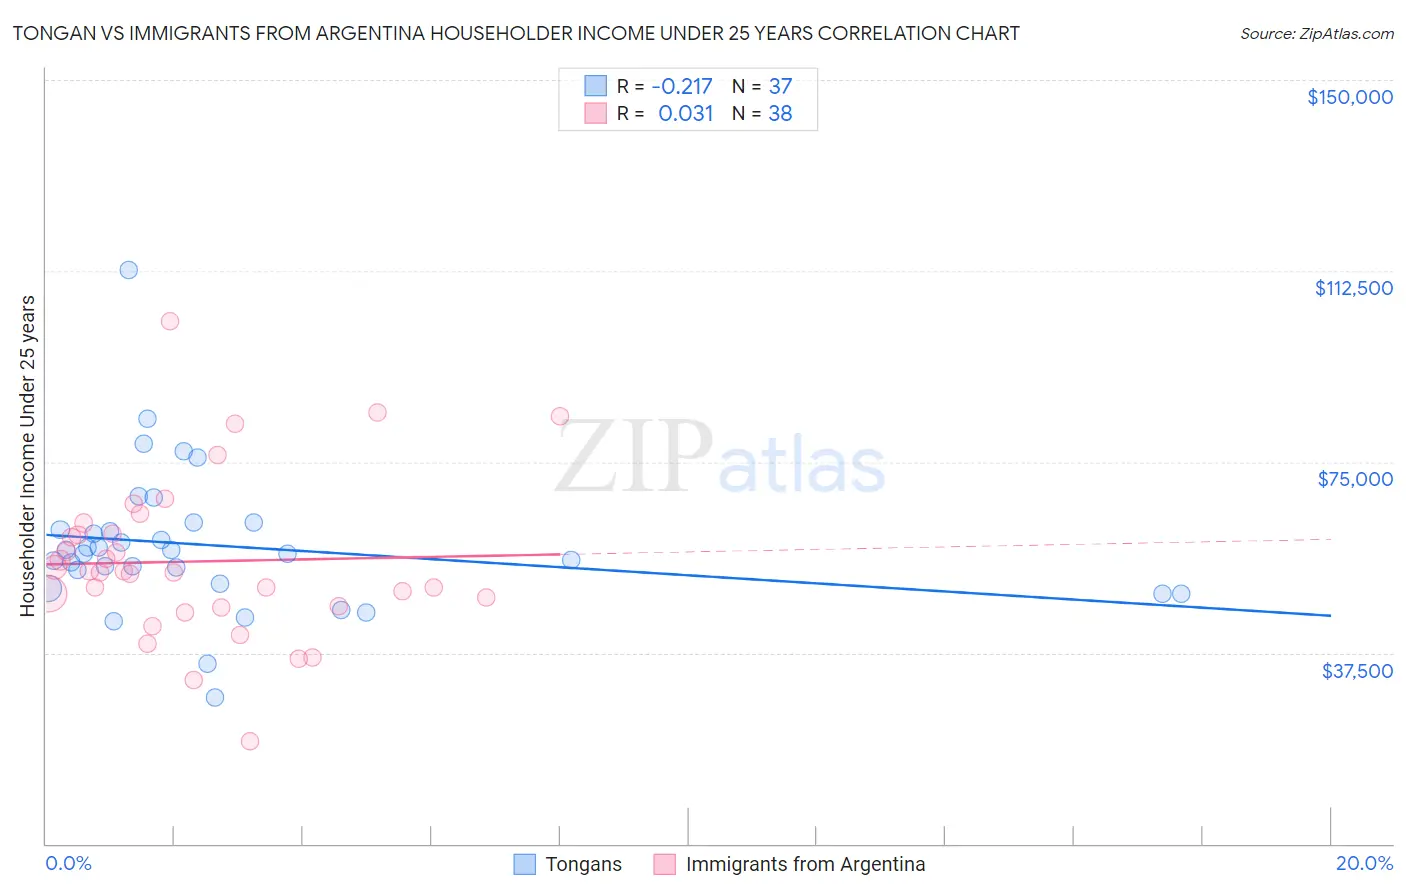 Tongan vs Immigrants from Argentina Householder Income Under 25 years